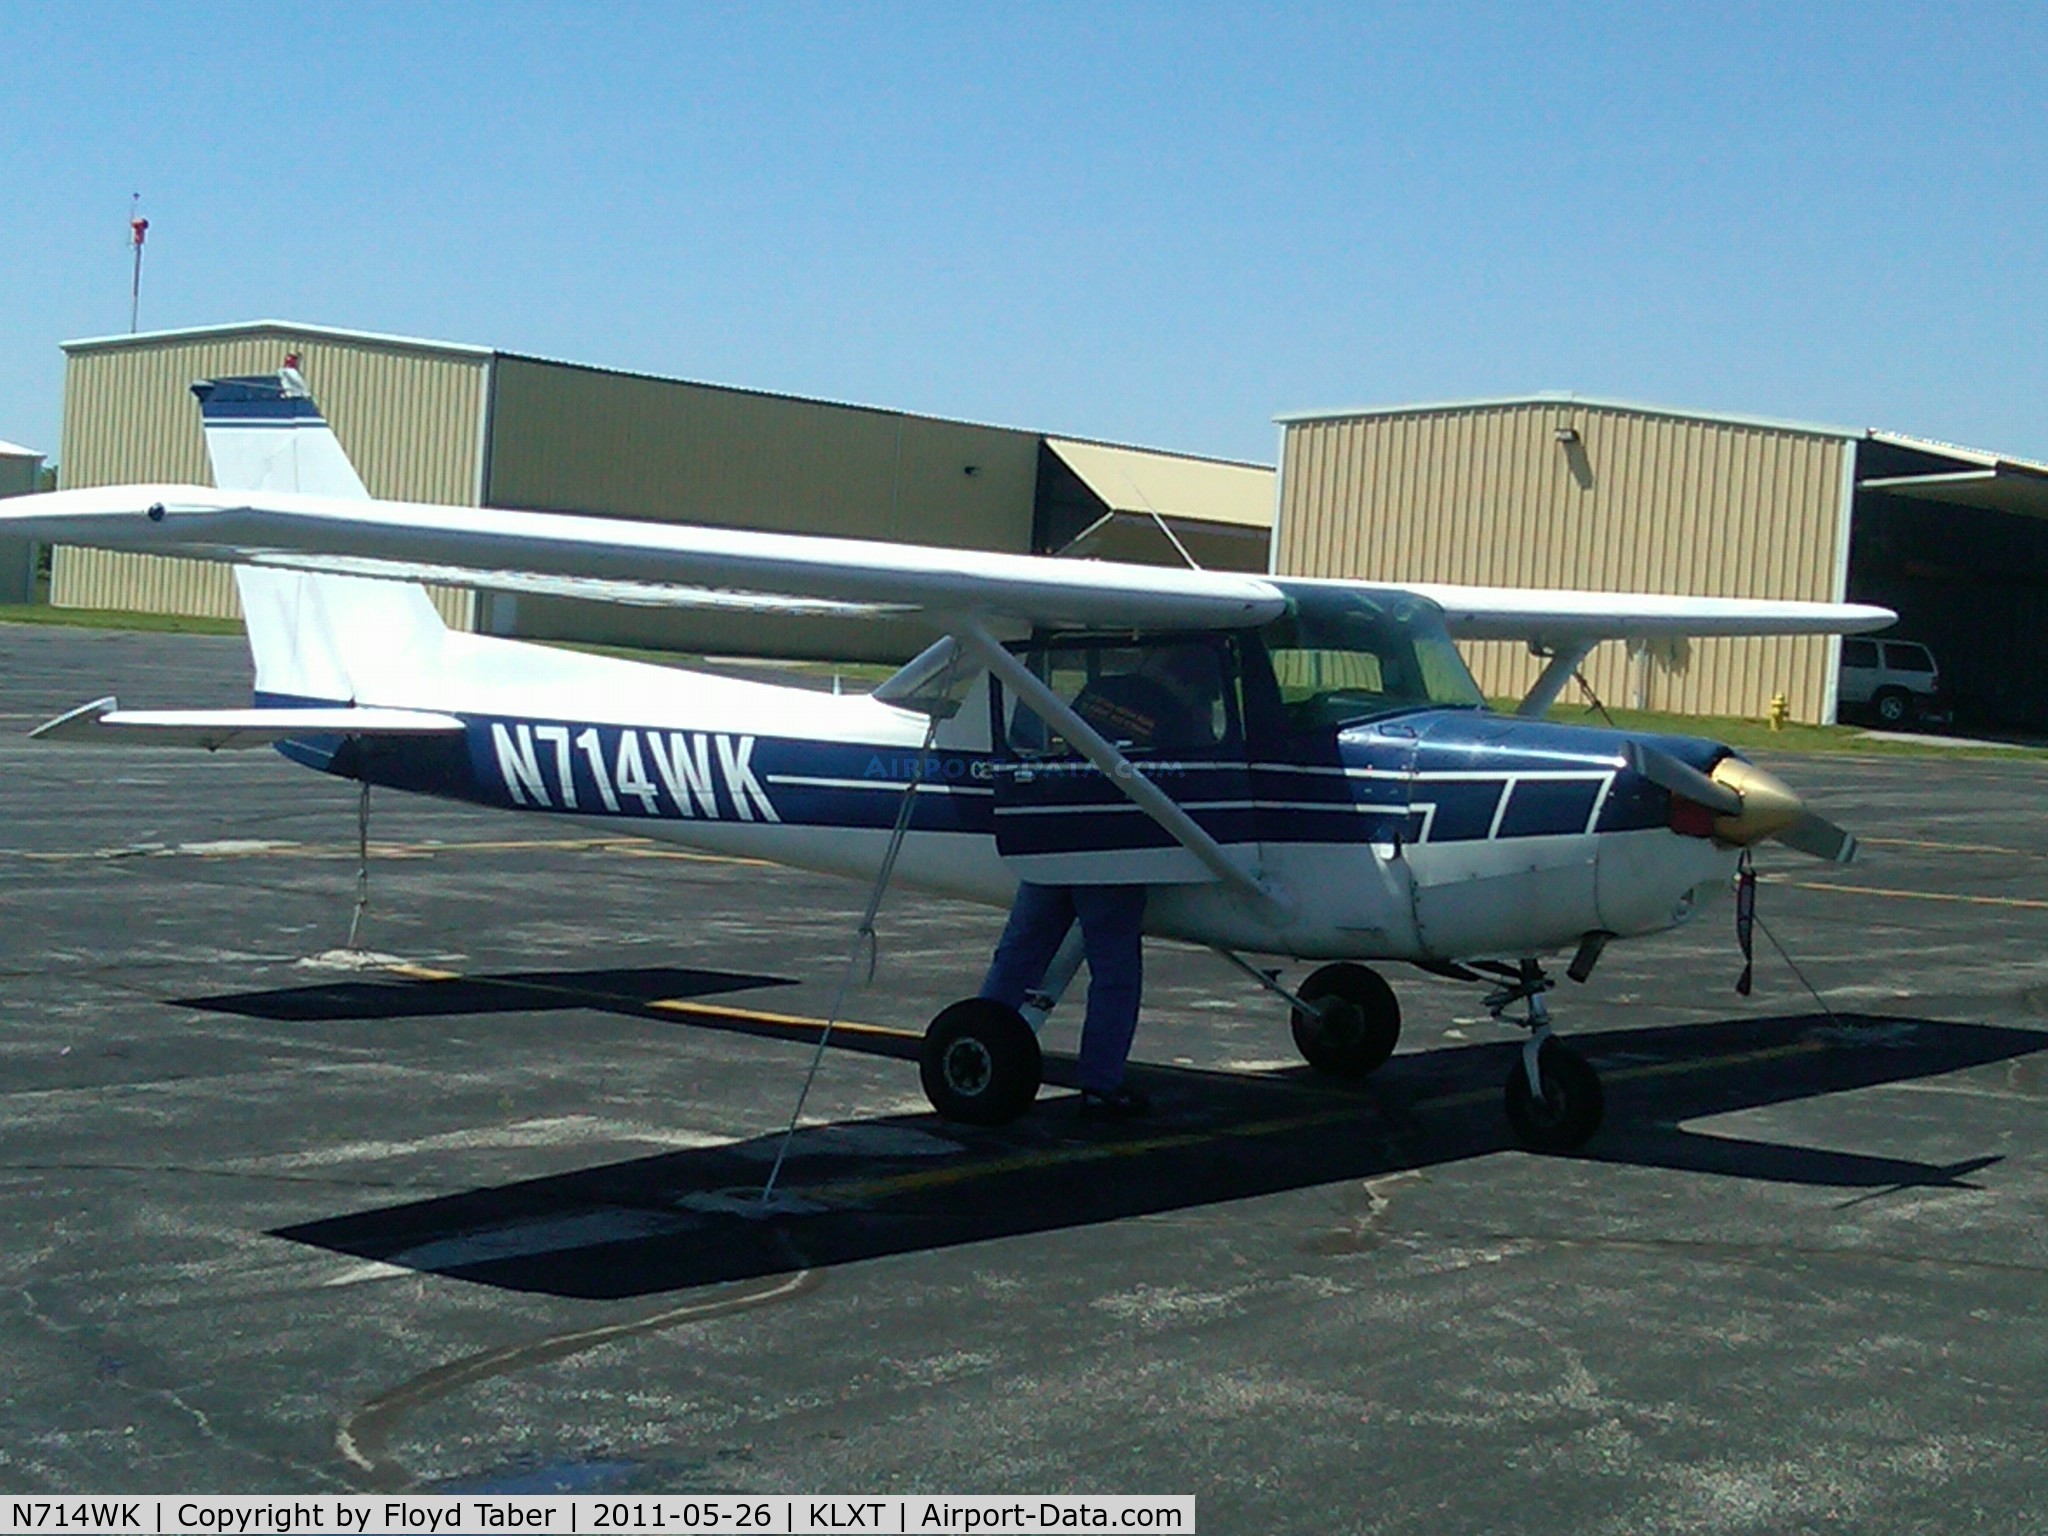 N714WK, 1977 Cessna 152 C/N 15279488, Student getting ready to go fly